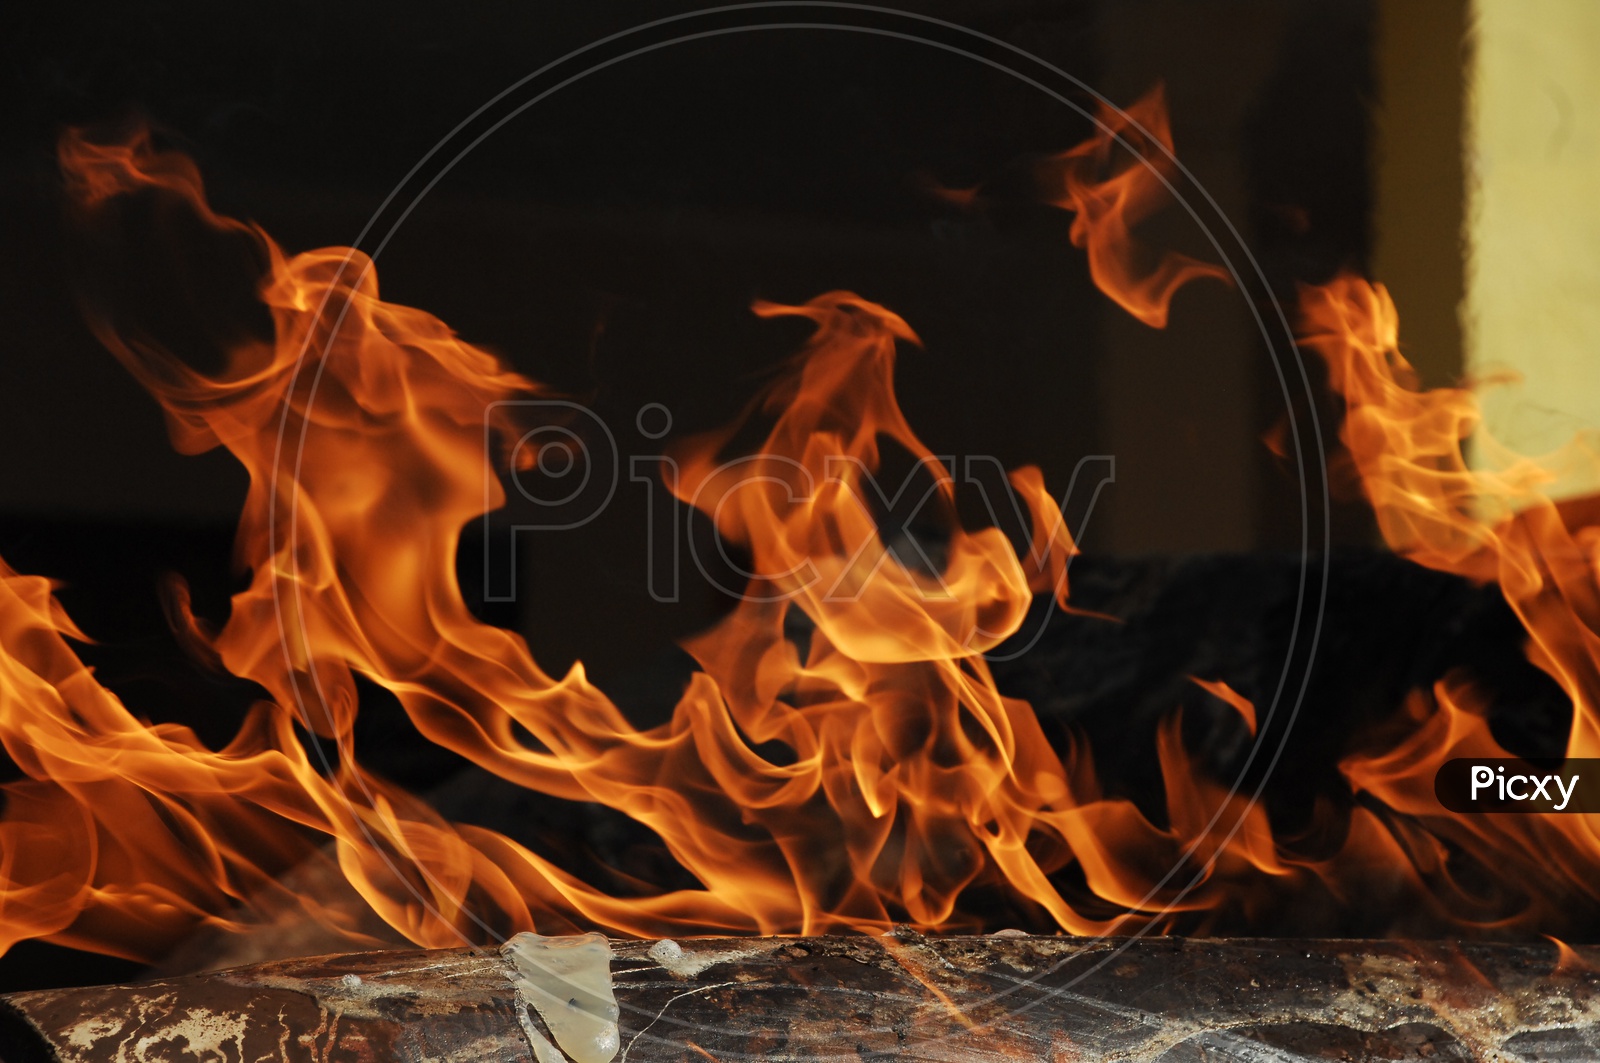 Photograph of Fire flames